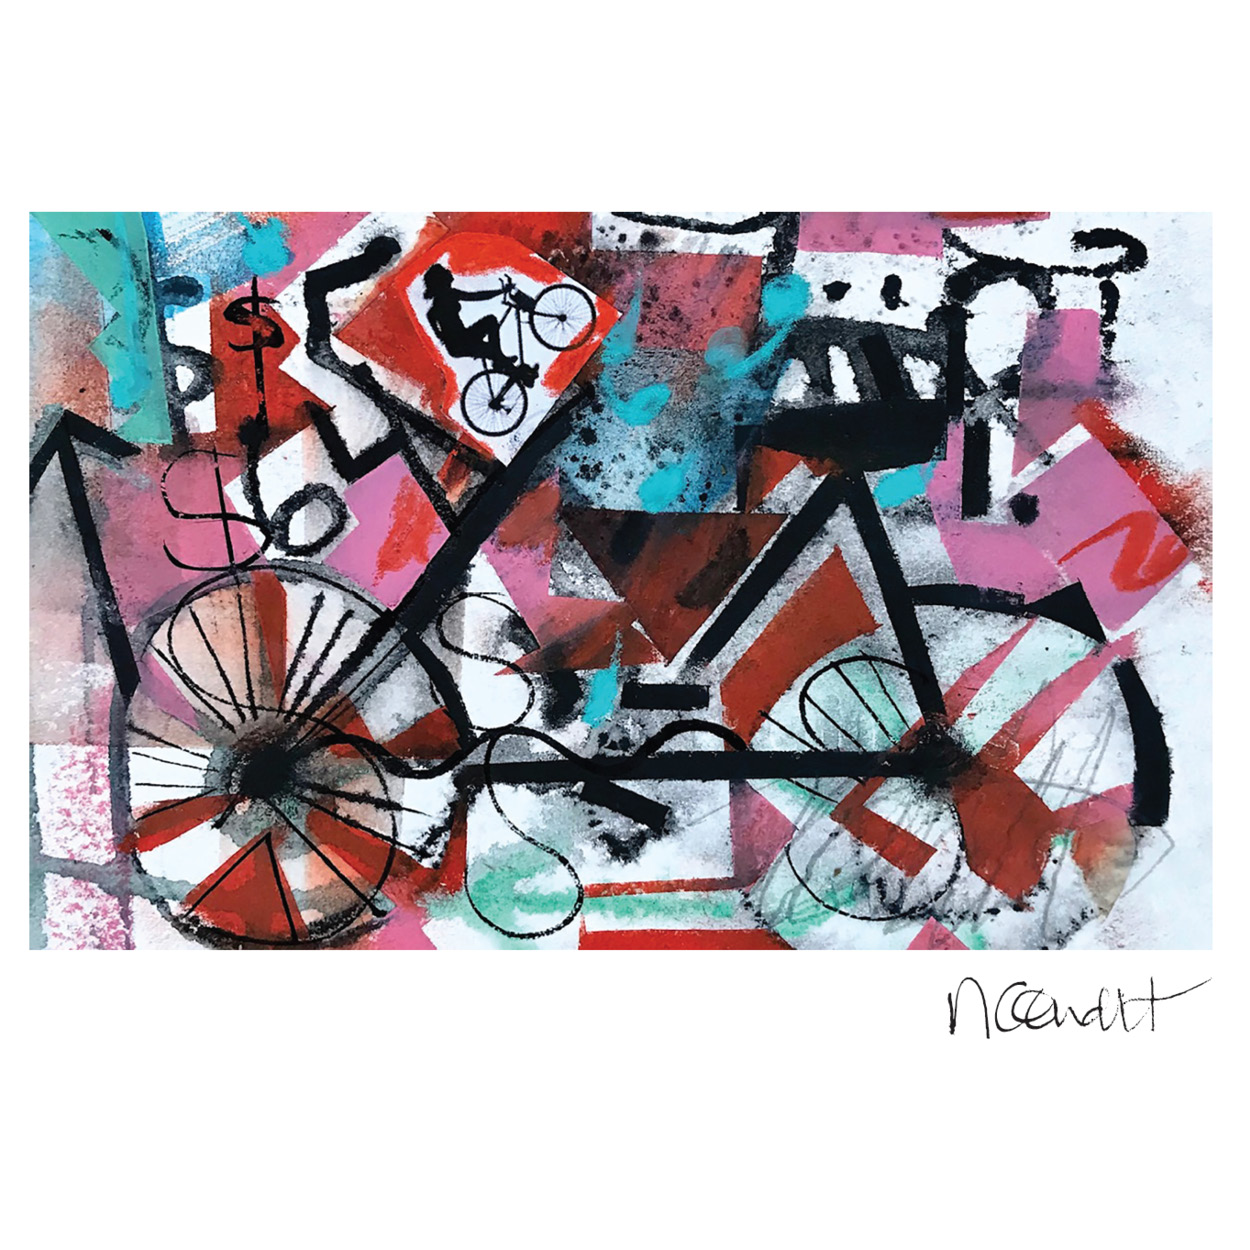 An art piece of a bicycle and geometric red, white, blue and pink patterns.